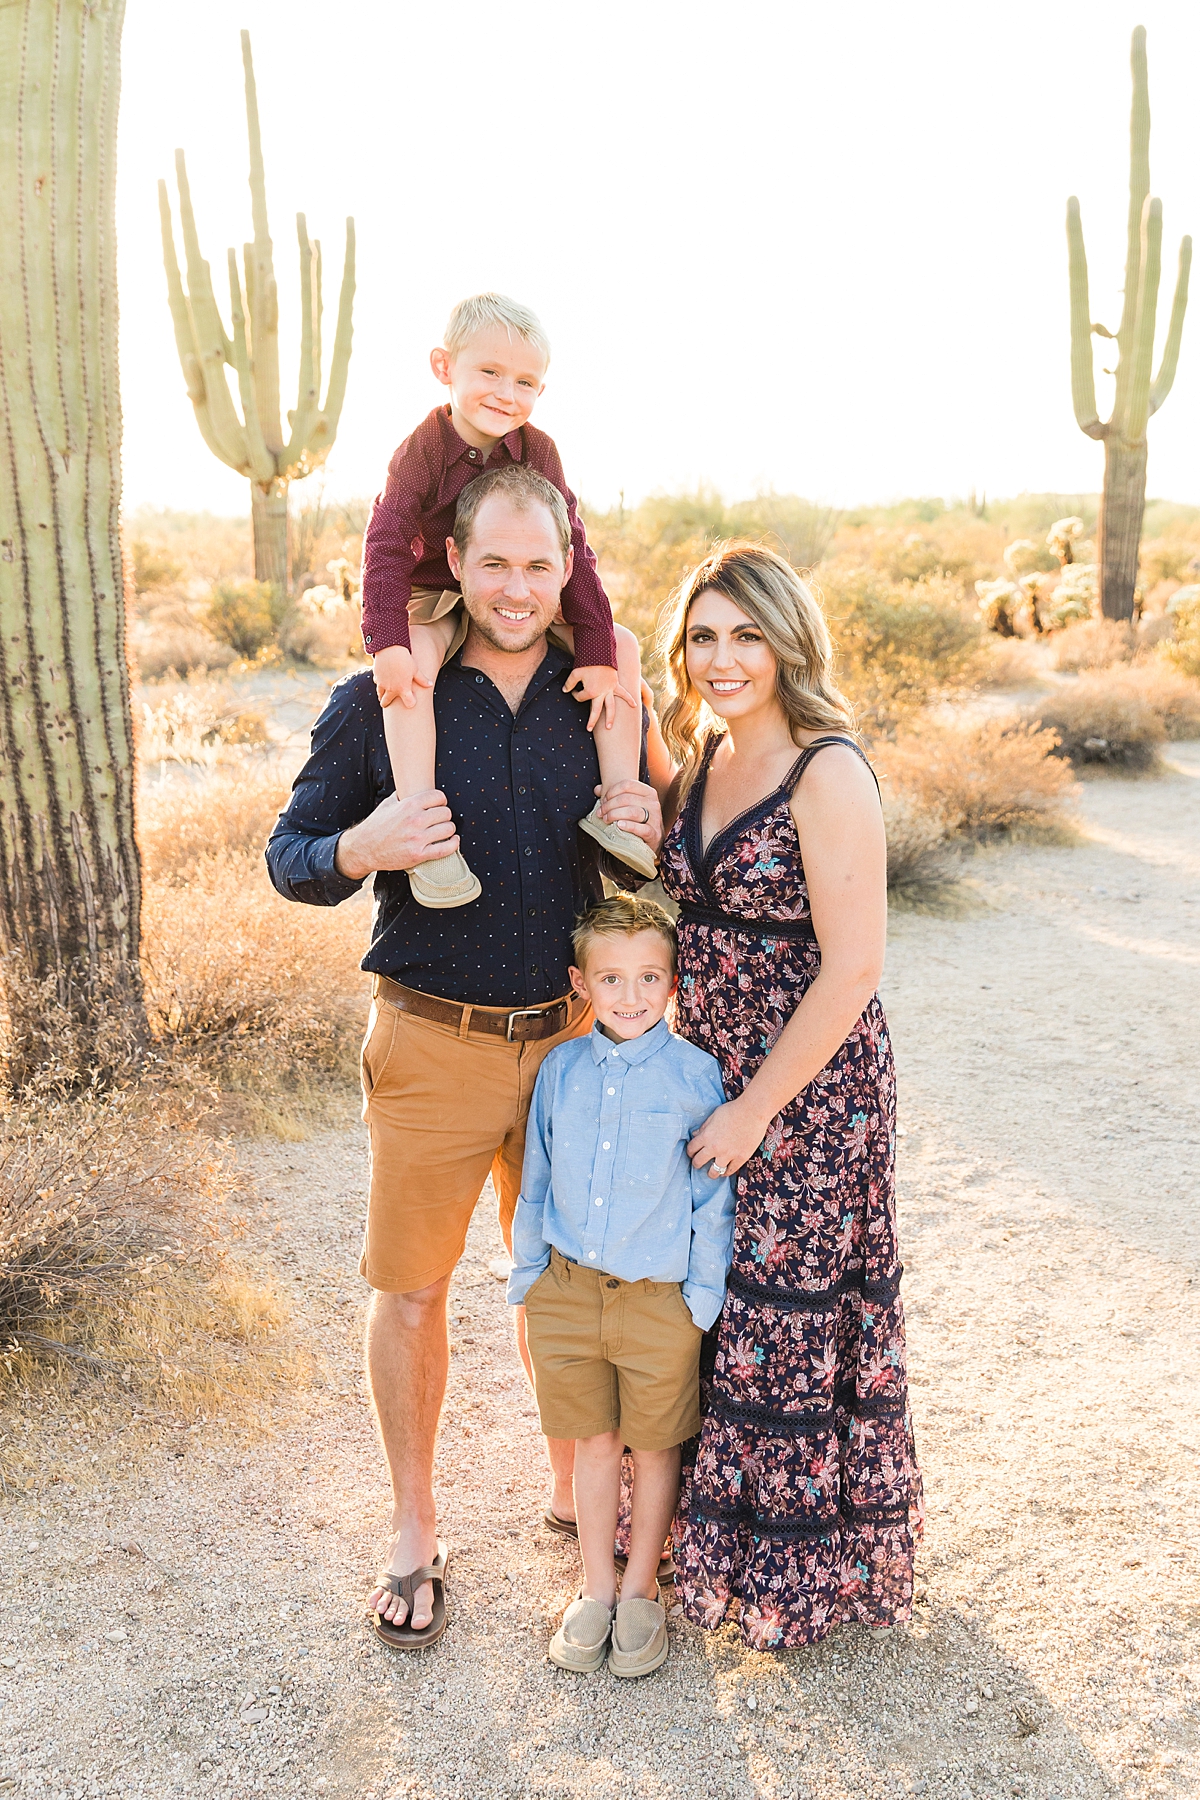 Leah Hope Photography | Scottsdale Arizona Family Photographer | Phoenix Arizona Family Pictures | Desert Landscape Cactus Mountains Scenery | Sunset Natural Light | How to Pose | Family Poses | Family Photos | Family Posing Ideas | Golden Hour Sunlight